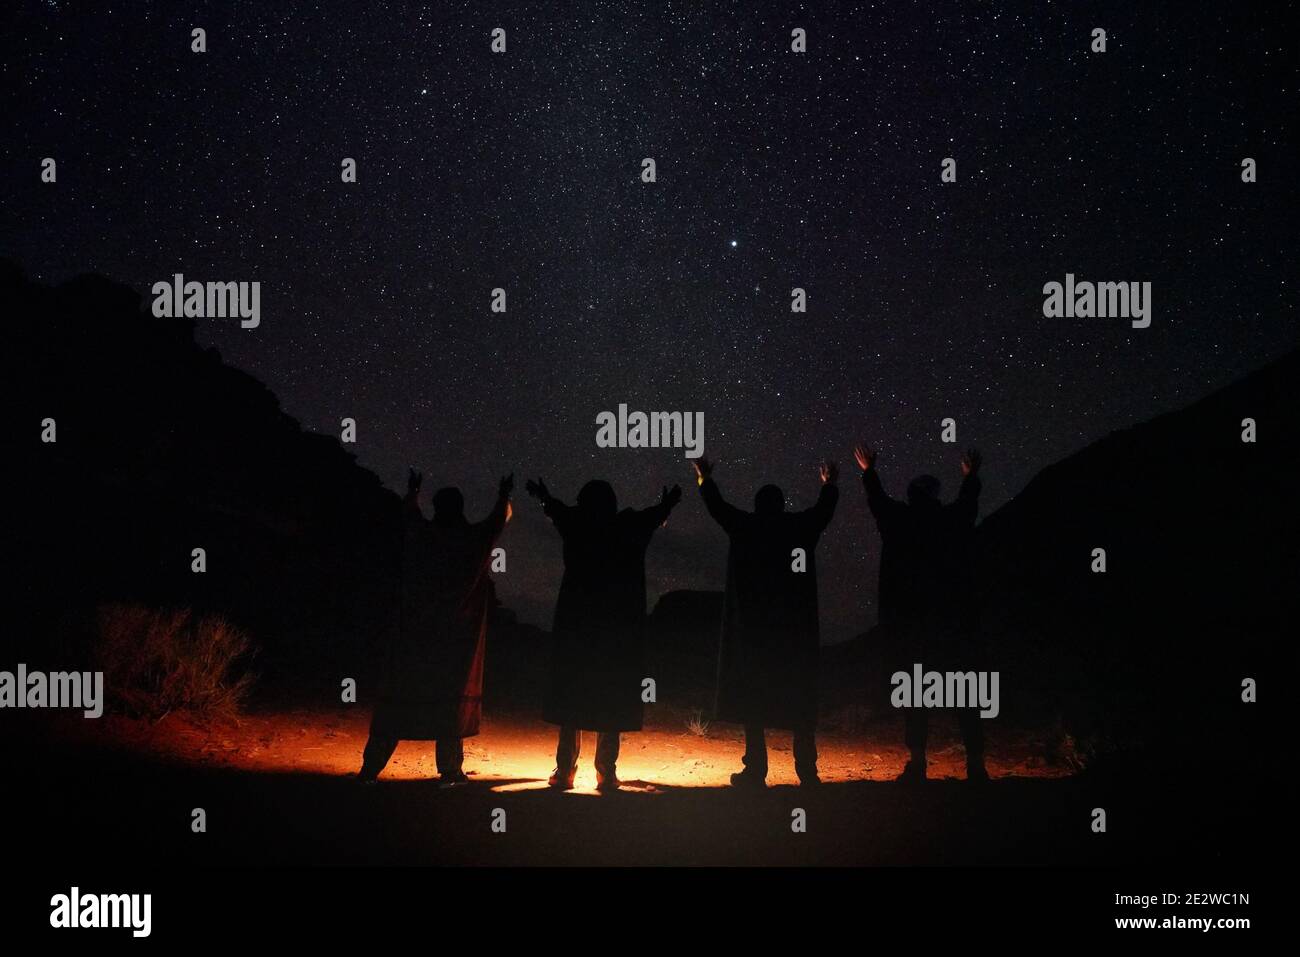 Four persons wearing long warm coats standing in night desert, hands raised to sky with stars, light on the ground, view from behind only silhouettes Stock Photo